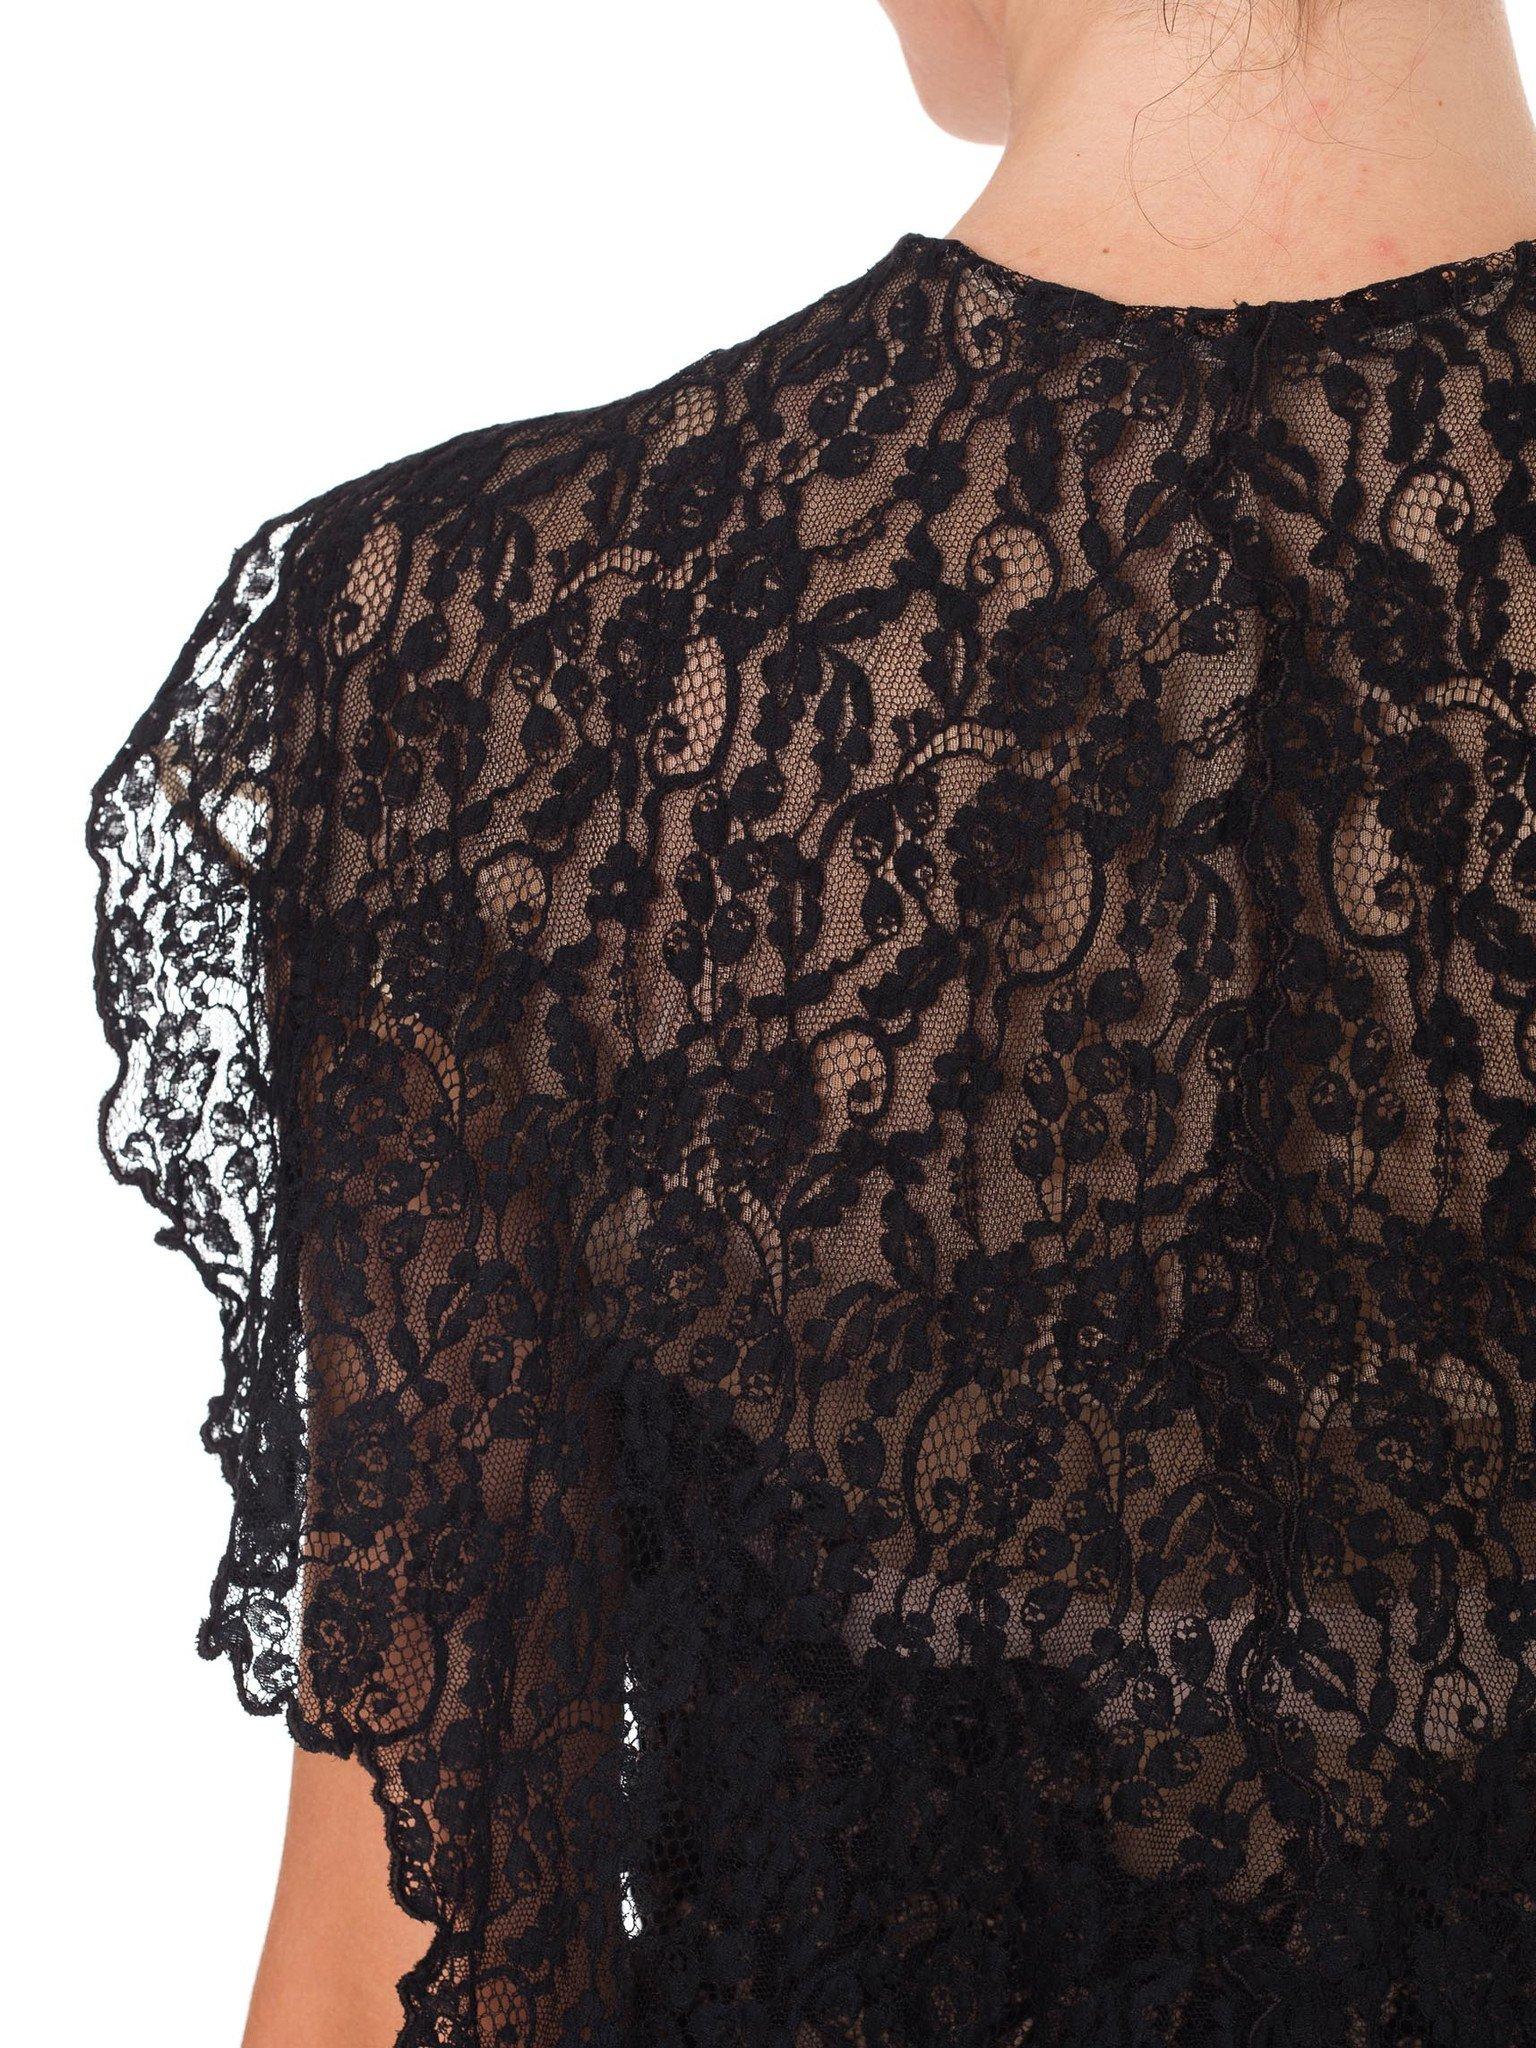 1930S Black & Nude Silk Chiffon Lace Gown With Attached Cape 7